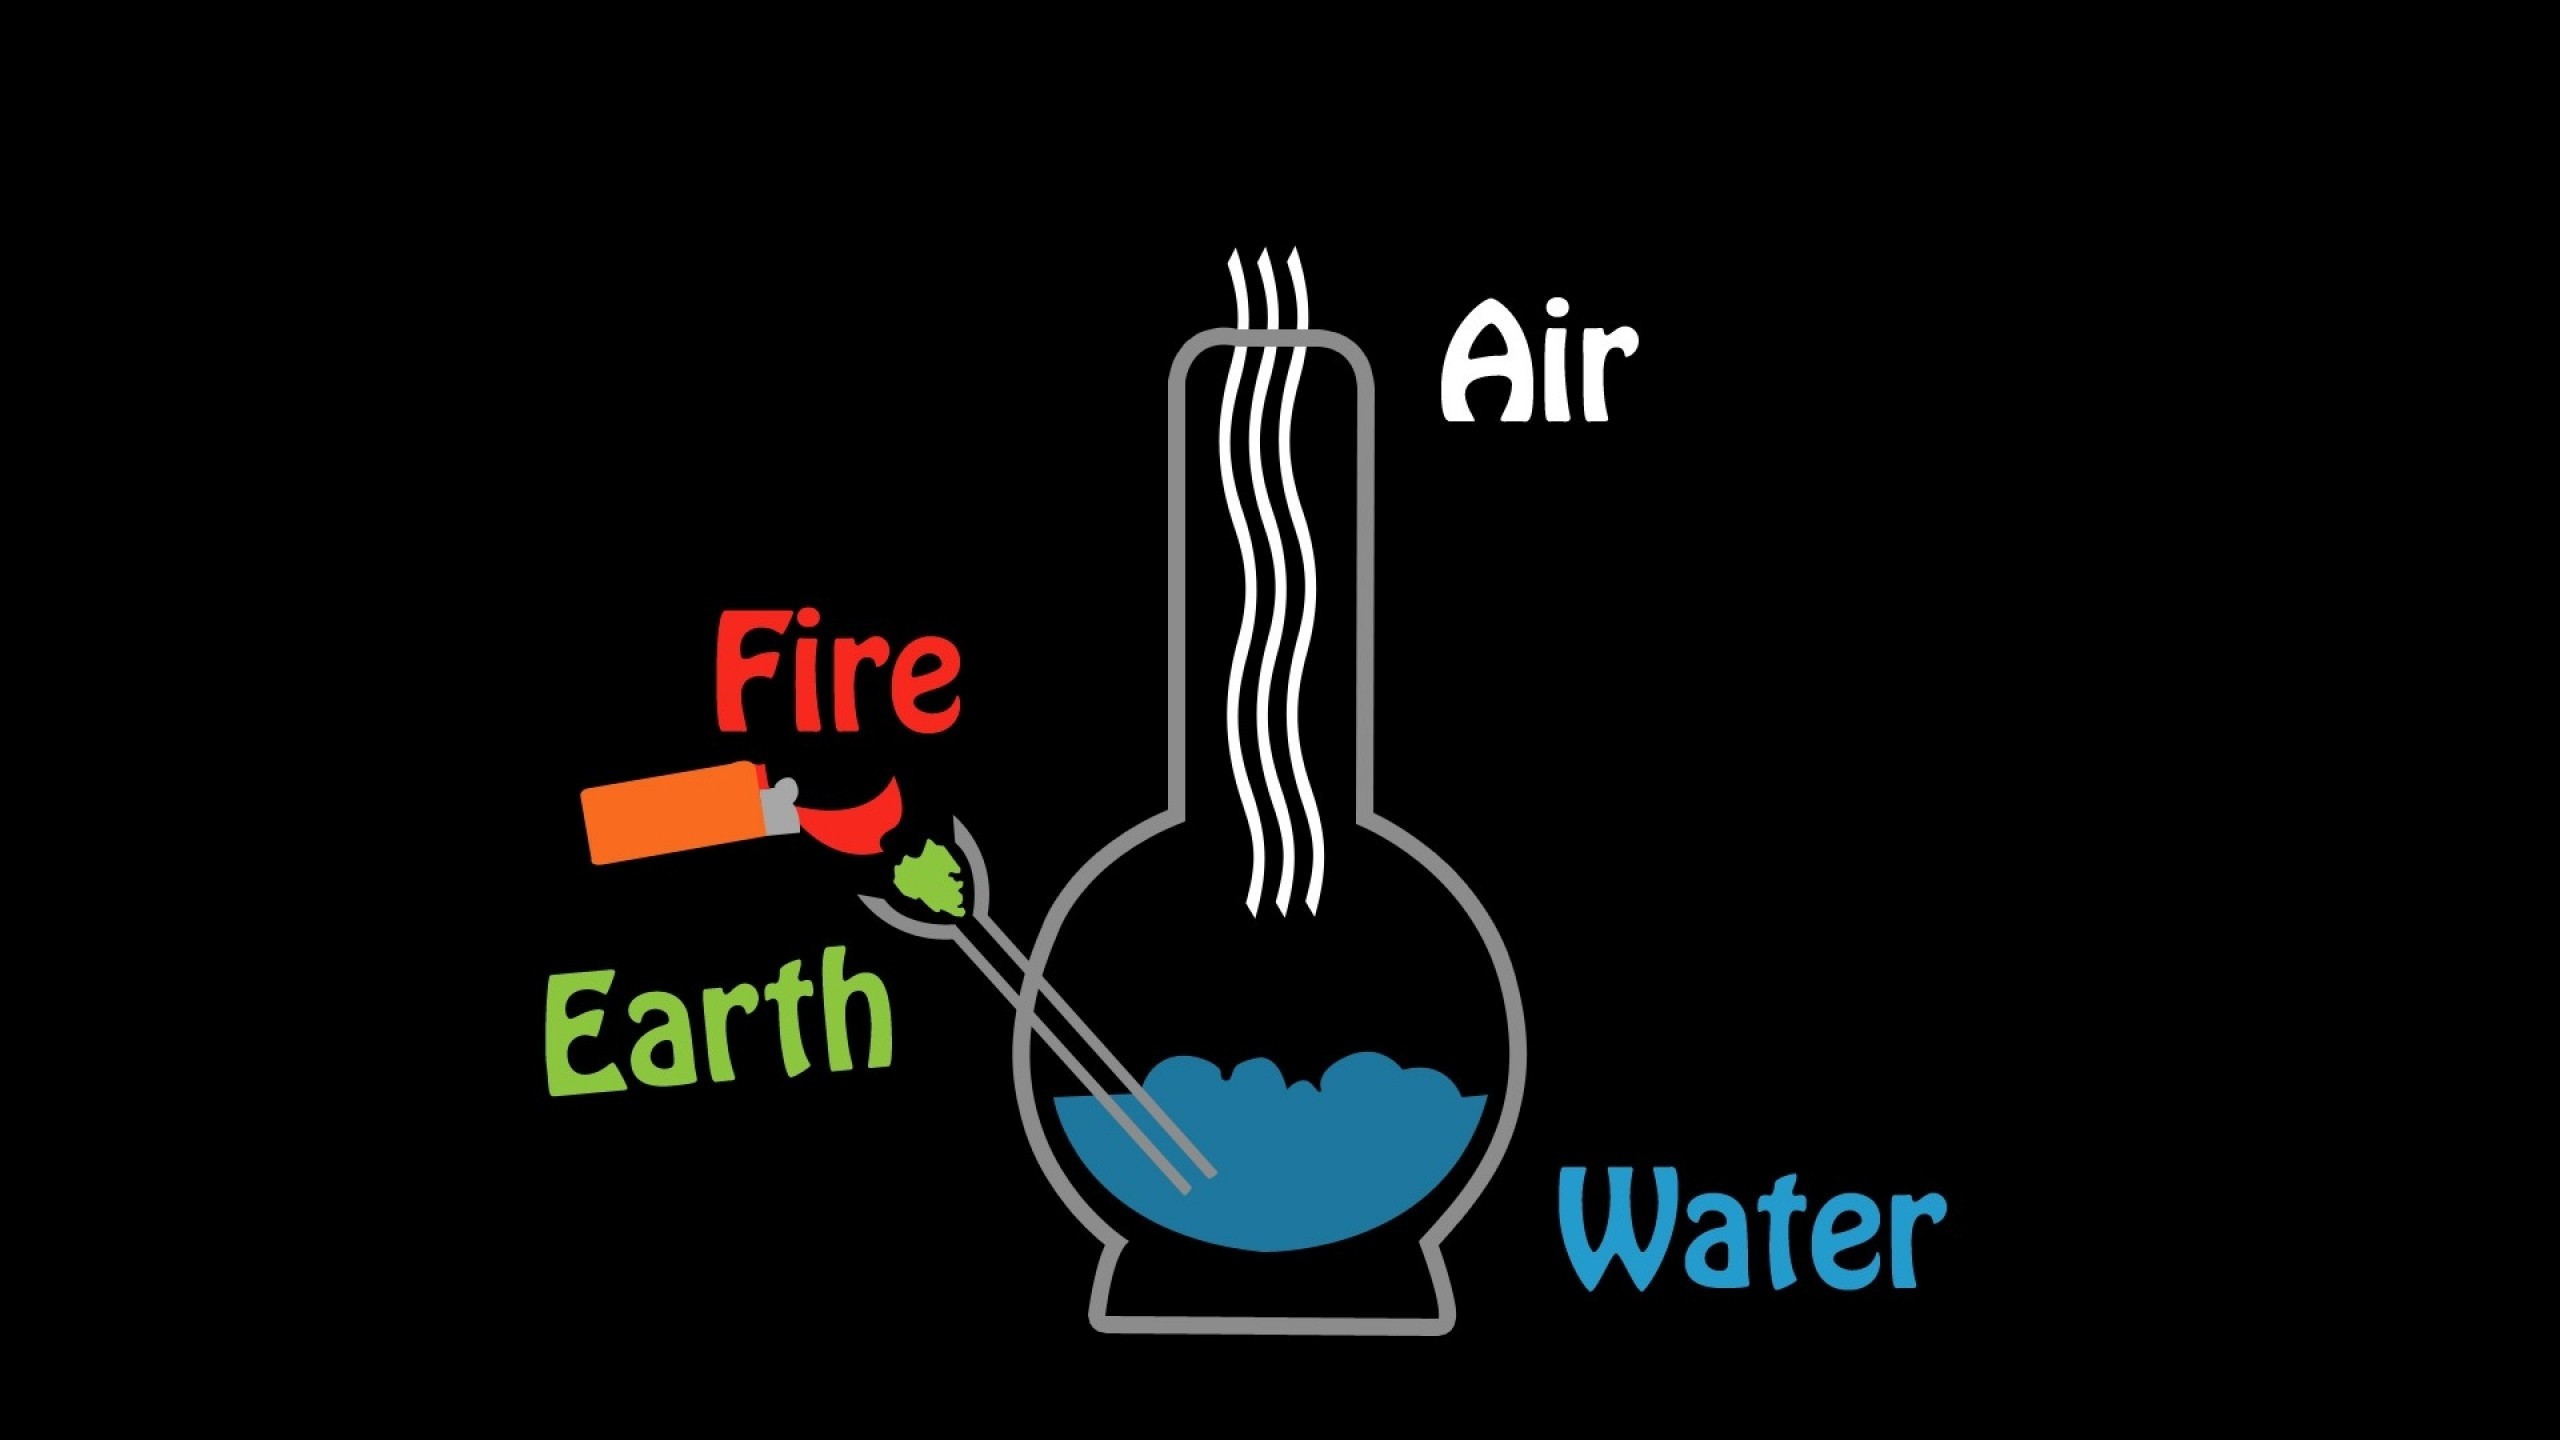 General 2560x1440 four elements drugs minimalism cannabis bong simple background black background science humor